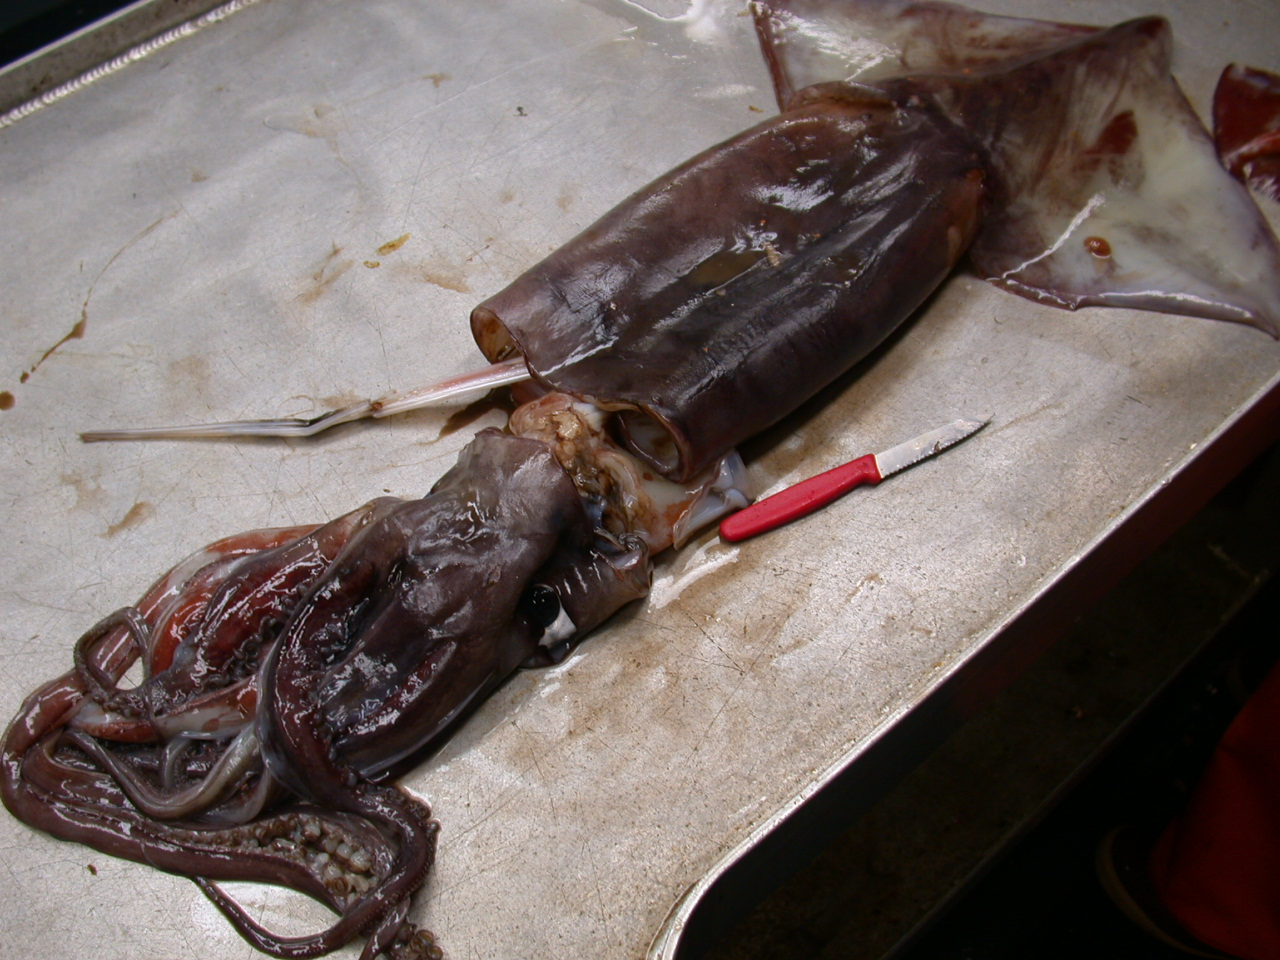 Dissecting a large squid